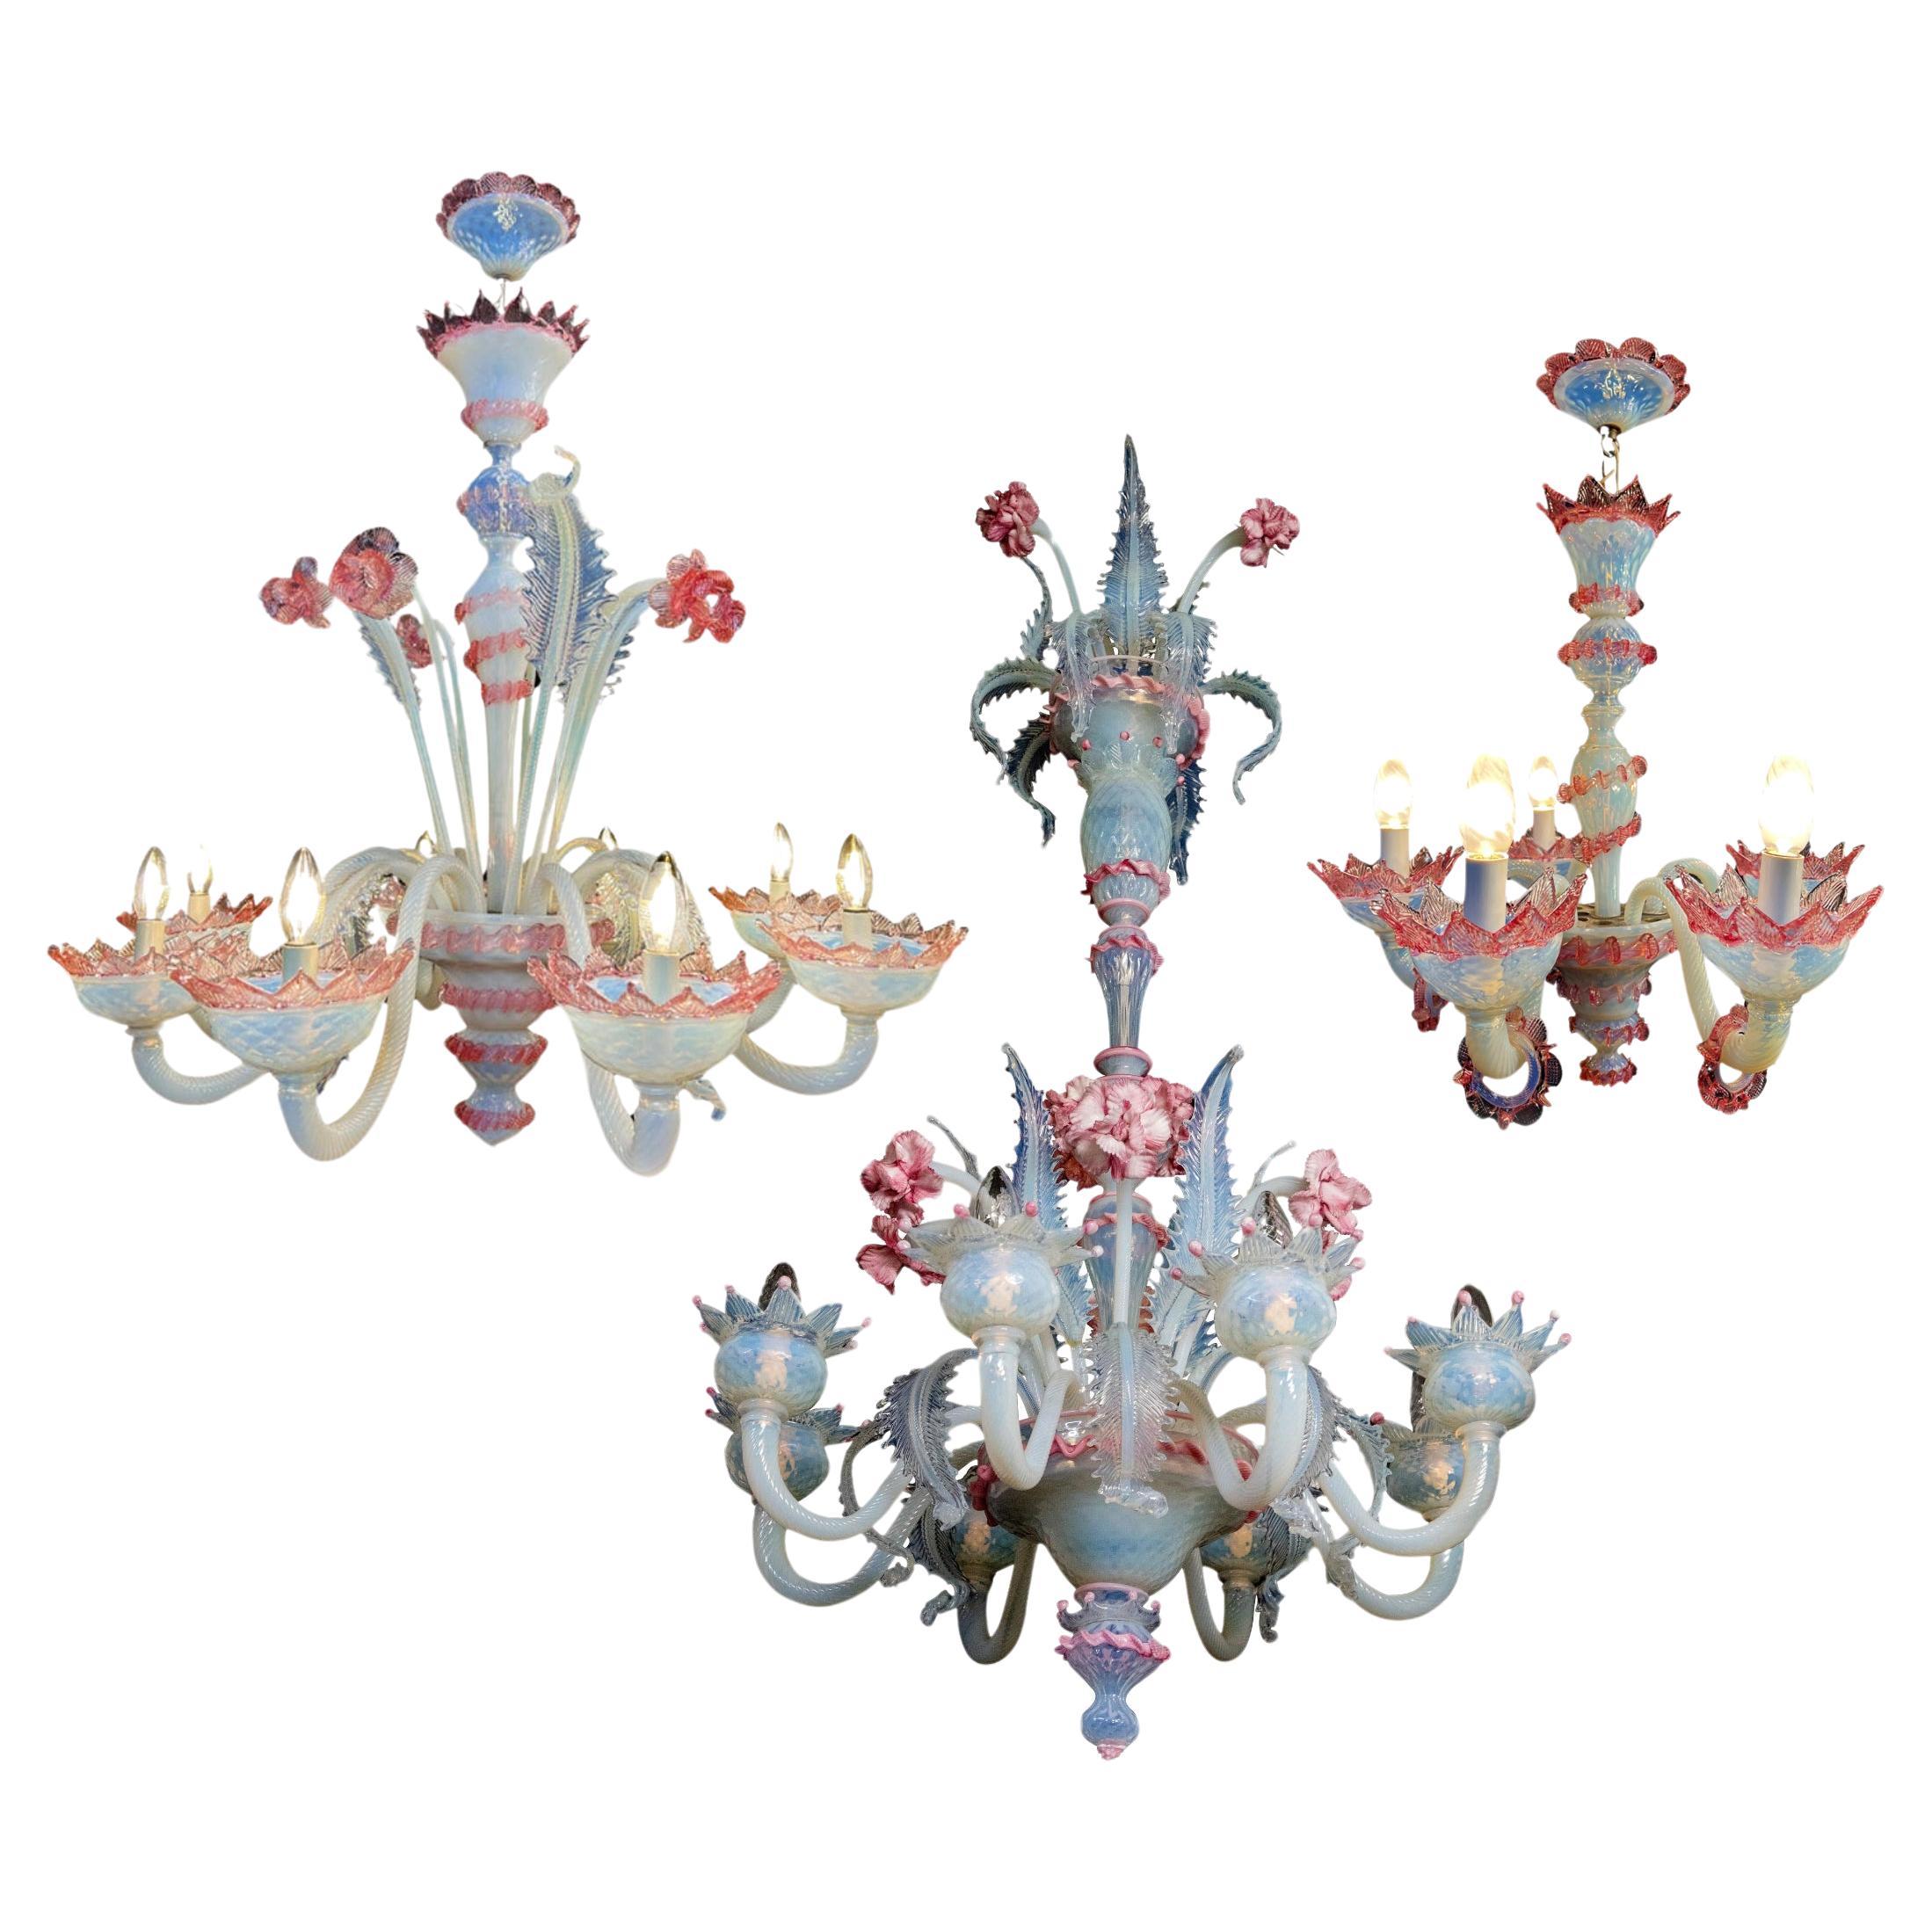 Stunning Trio Light Blue and Pink Venetian Chandeliers, Murano, 1950s For Sale